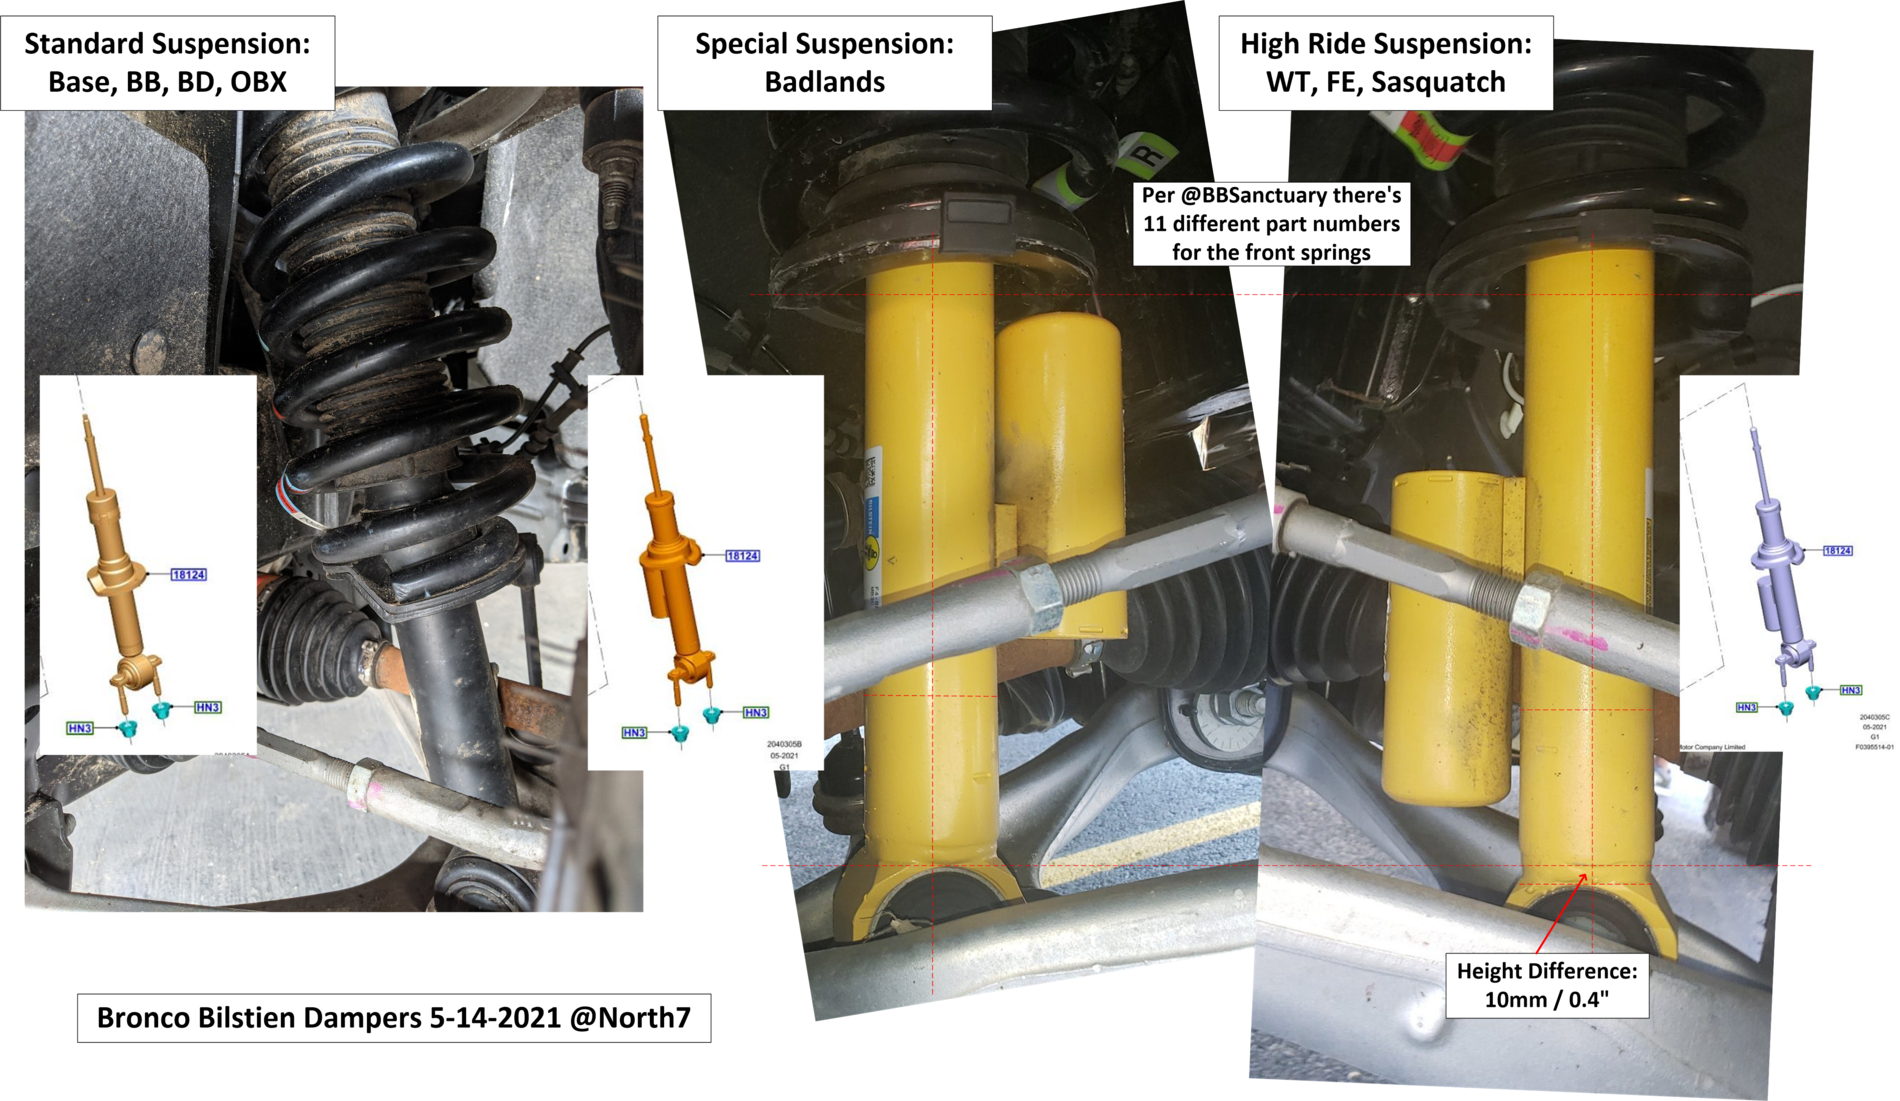 Ford Bronco More 2021 Bronco Suspension Info & Part Numbers: Standard, Special and High Ride Bronco Shock Comparison 5-14-2021